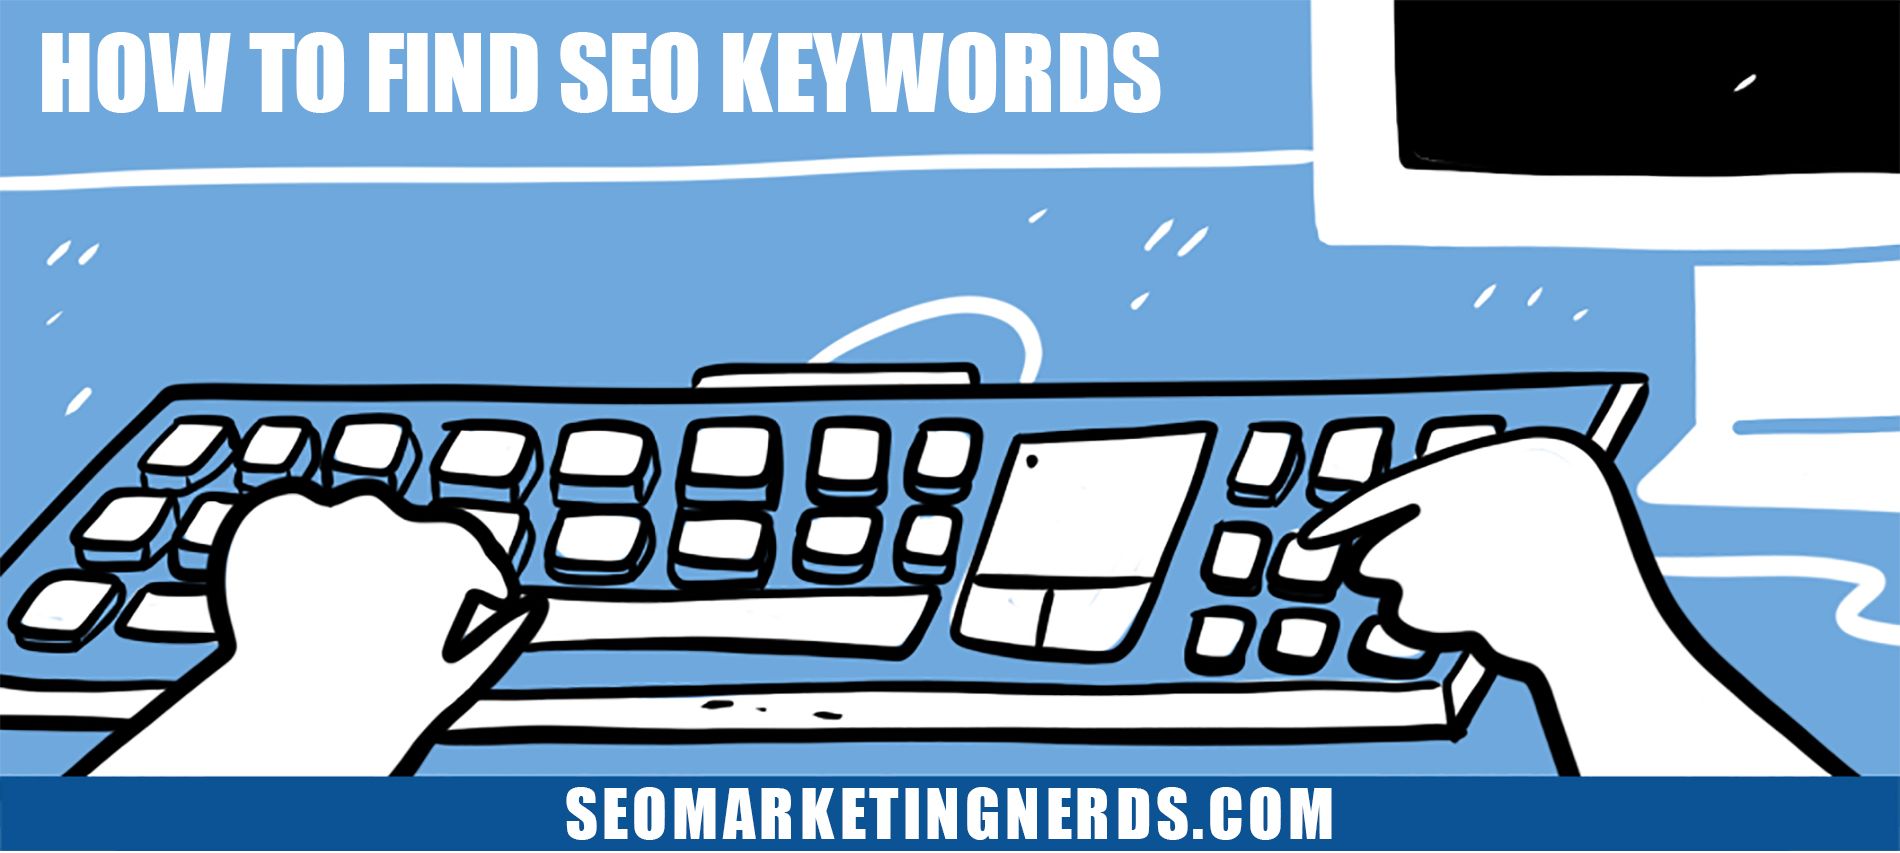 How to find SEO keywords?